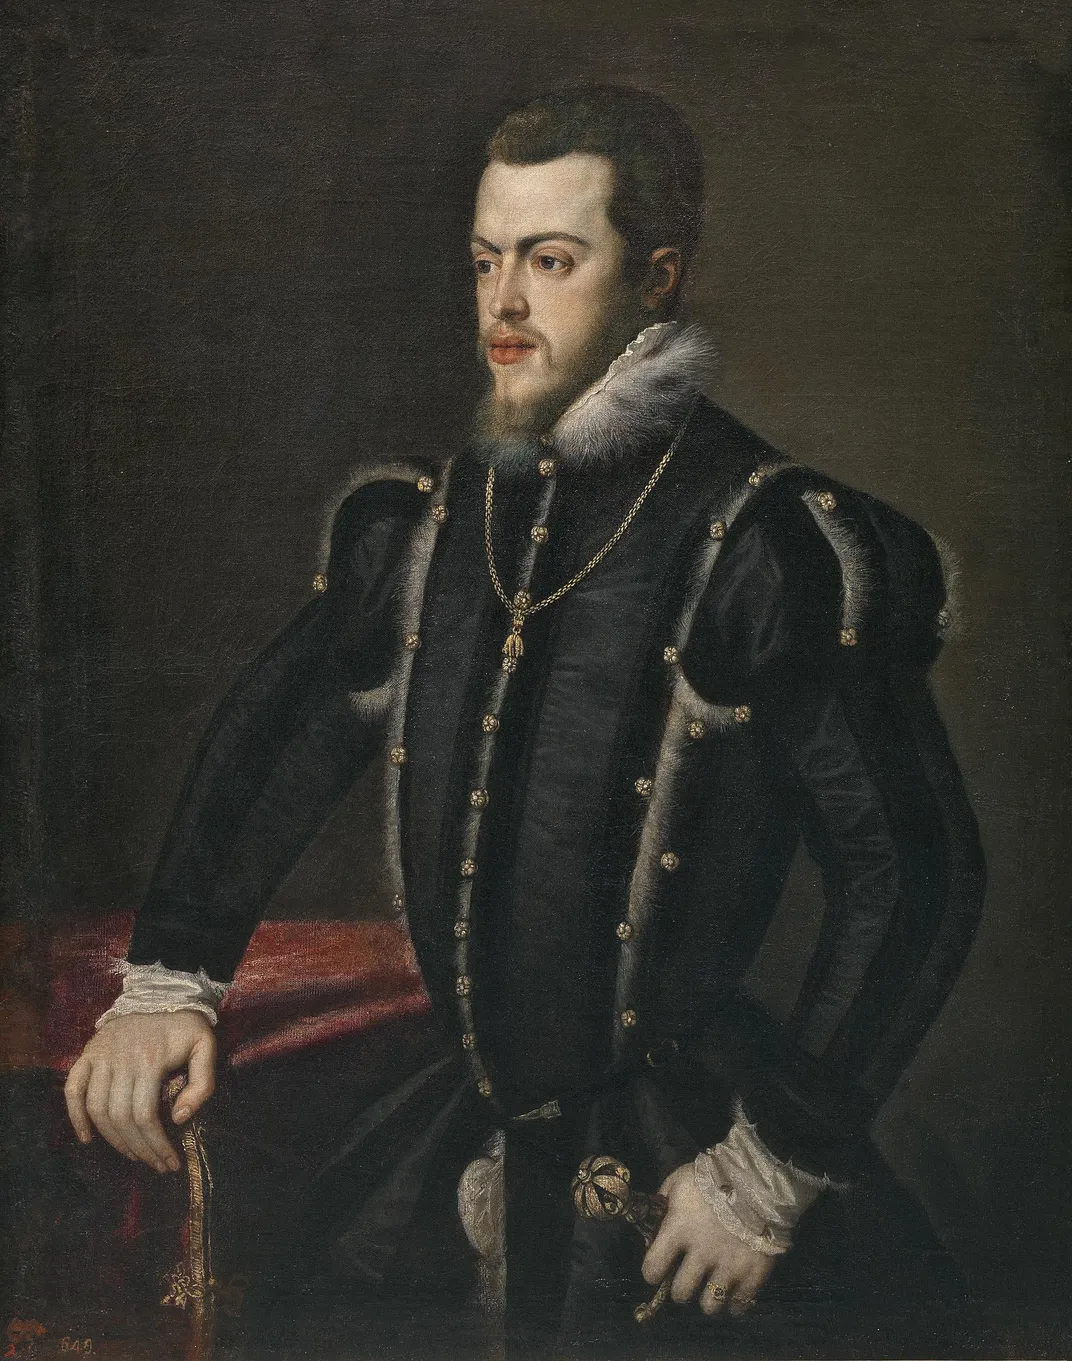 A portrait of Mary's husband, Philip II of Spain